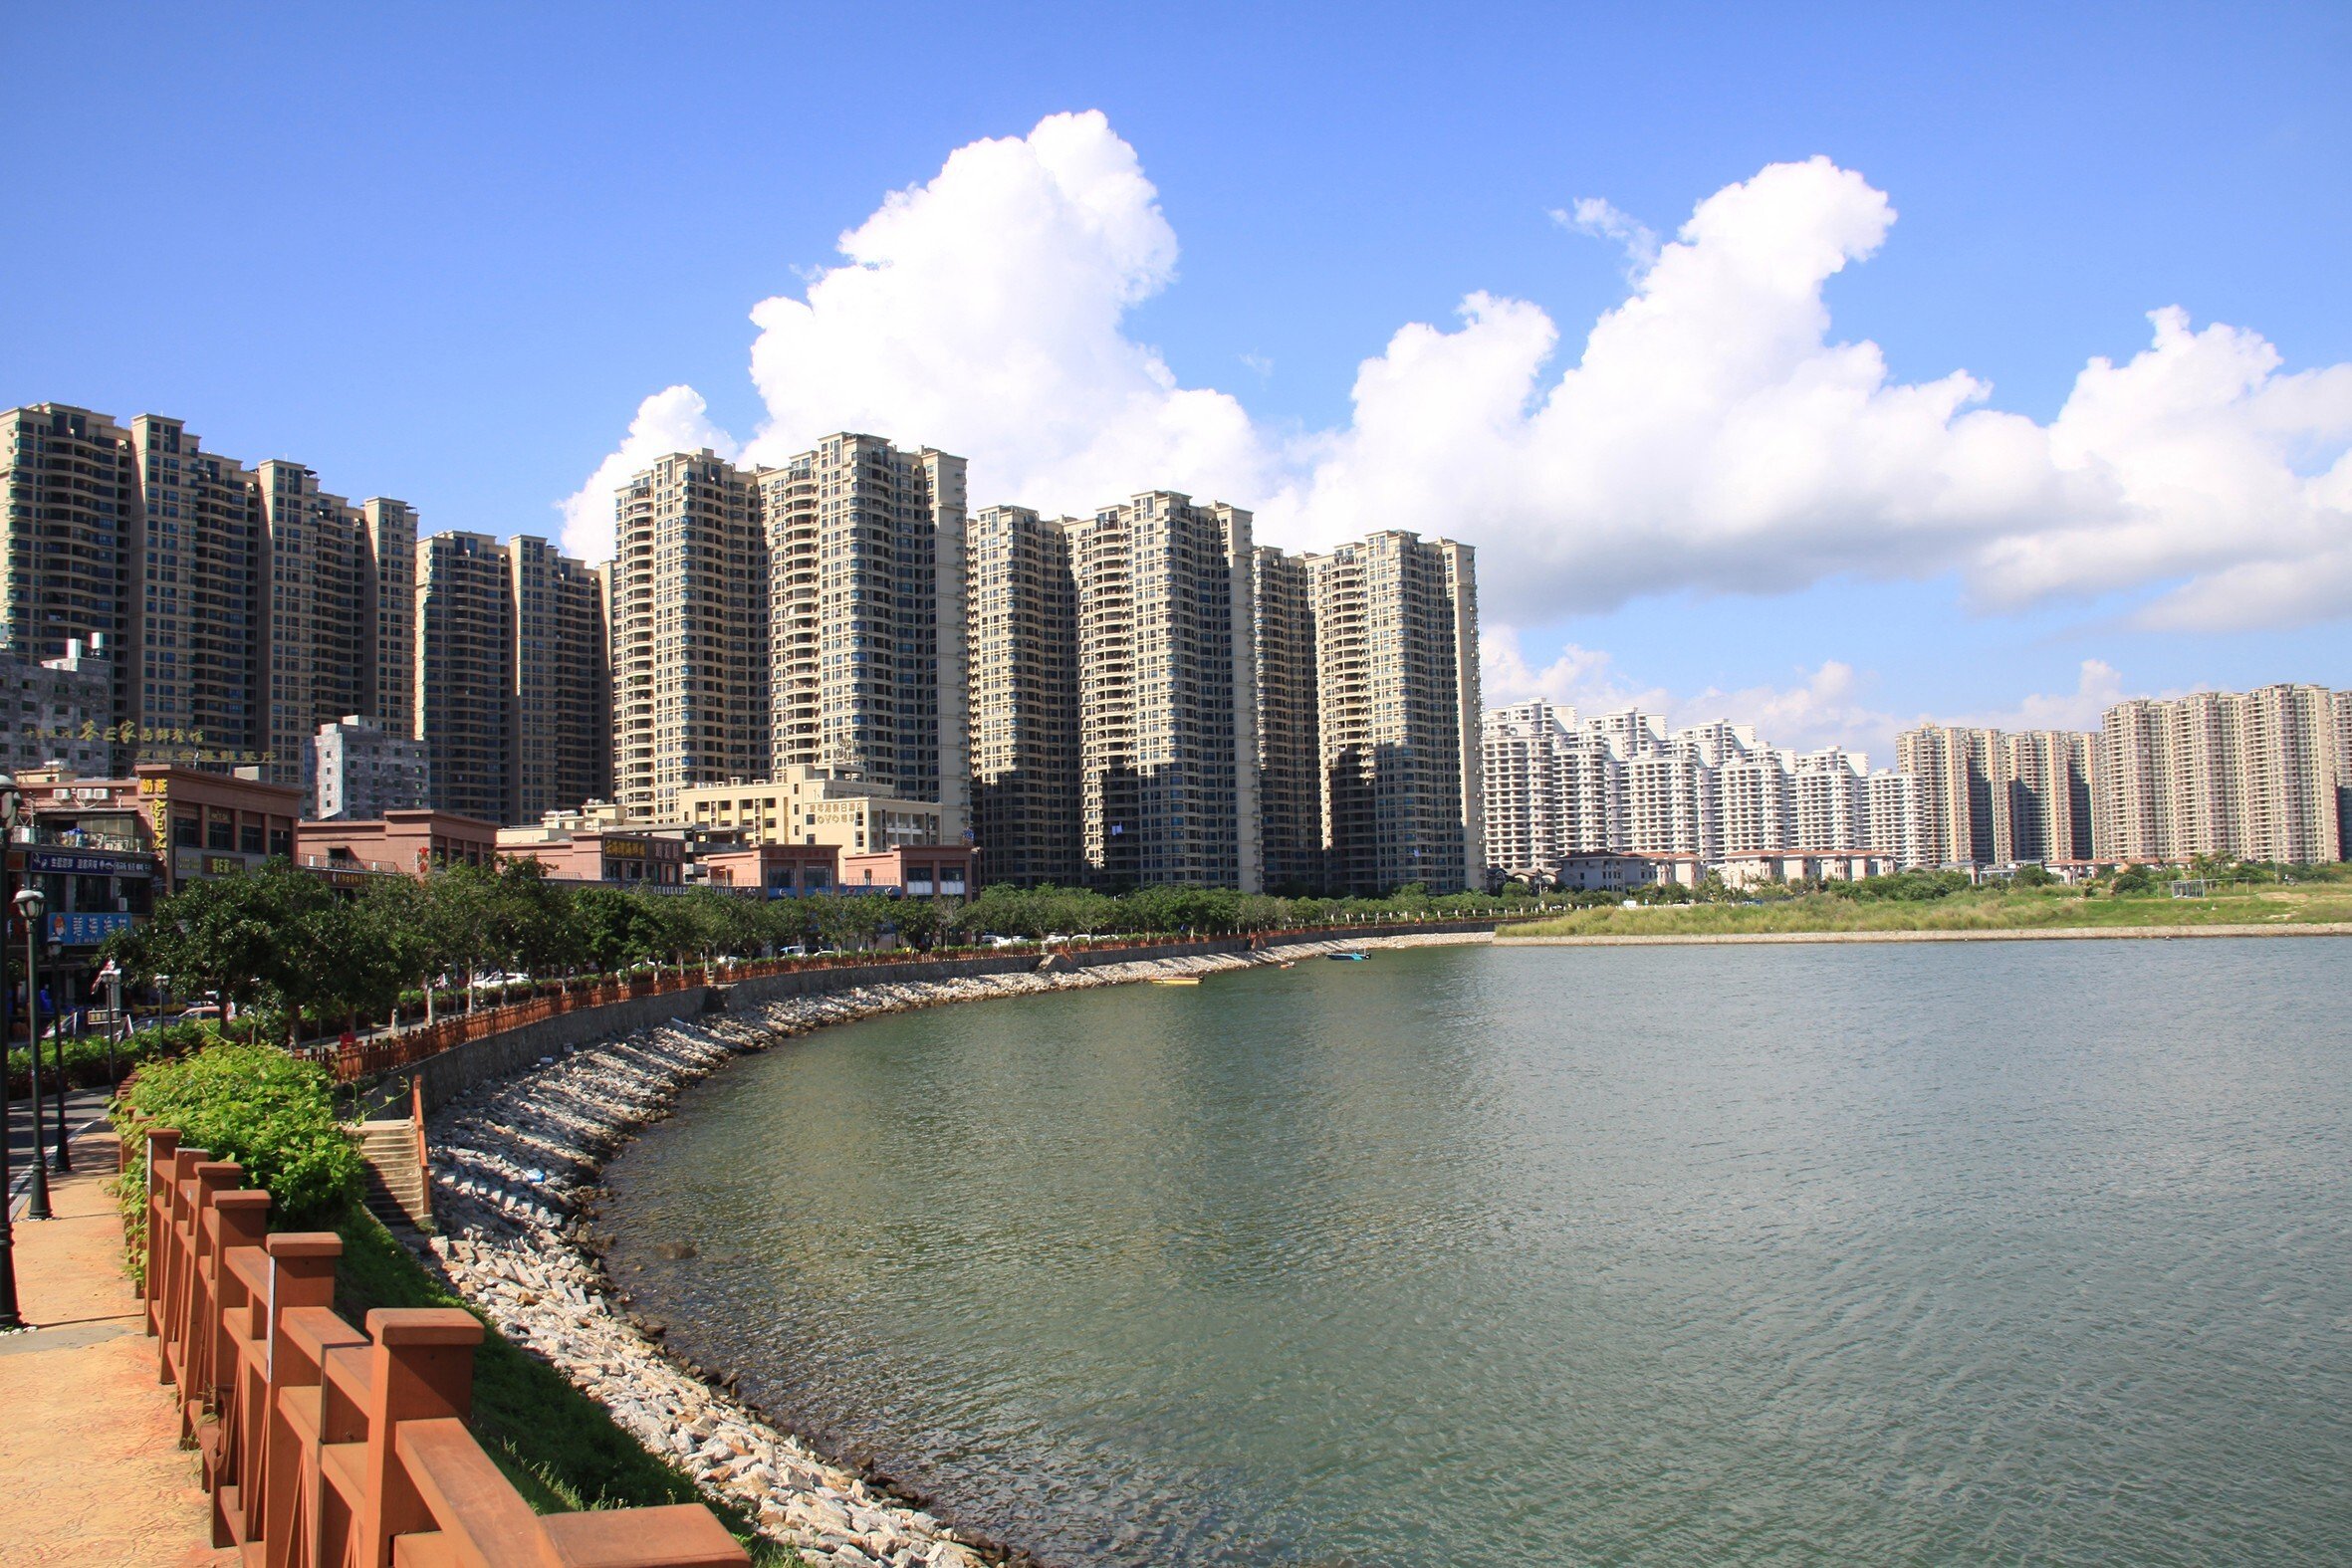 Huizhou in southern China’s Guangdong province, one of the 11 cities that make up the Greater Bay Area (GBA), on June 2020. Photo: SHUTTERSTOCK